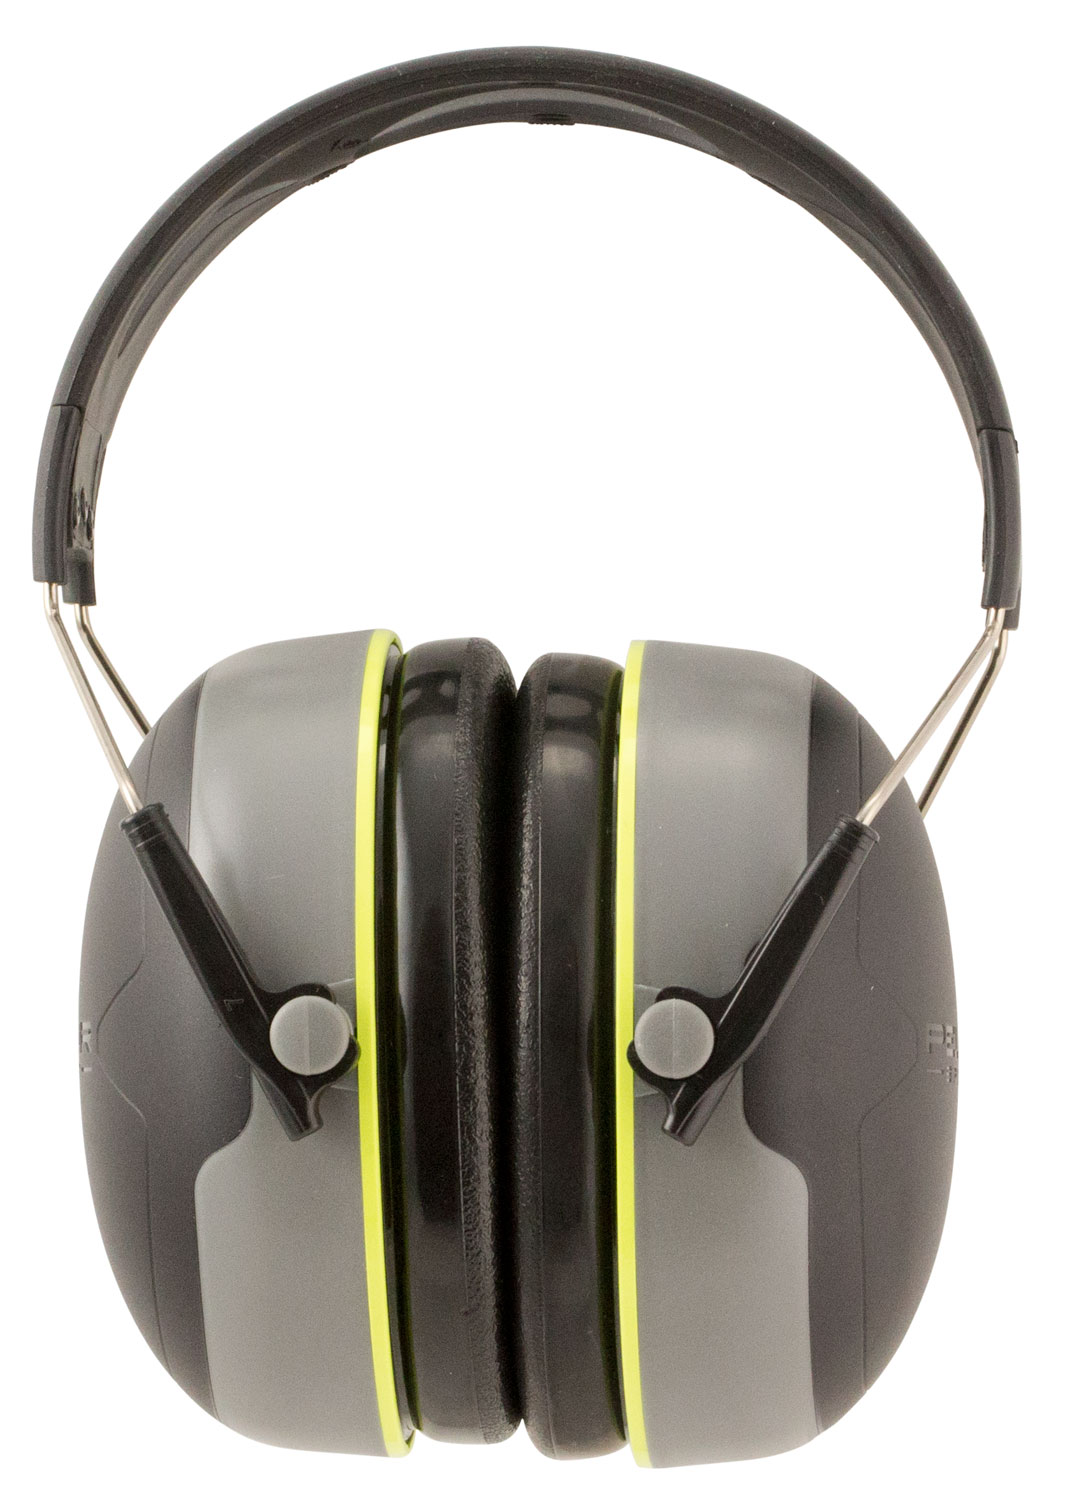 Peltor 97041 Sport Bulls Eye 27 dB Over the Head Low-Profile Gray Ear Cups with Adjustable Black Headband for Adults 1 Pair